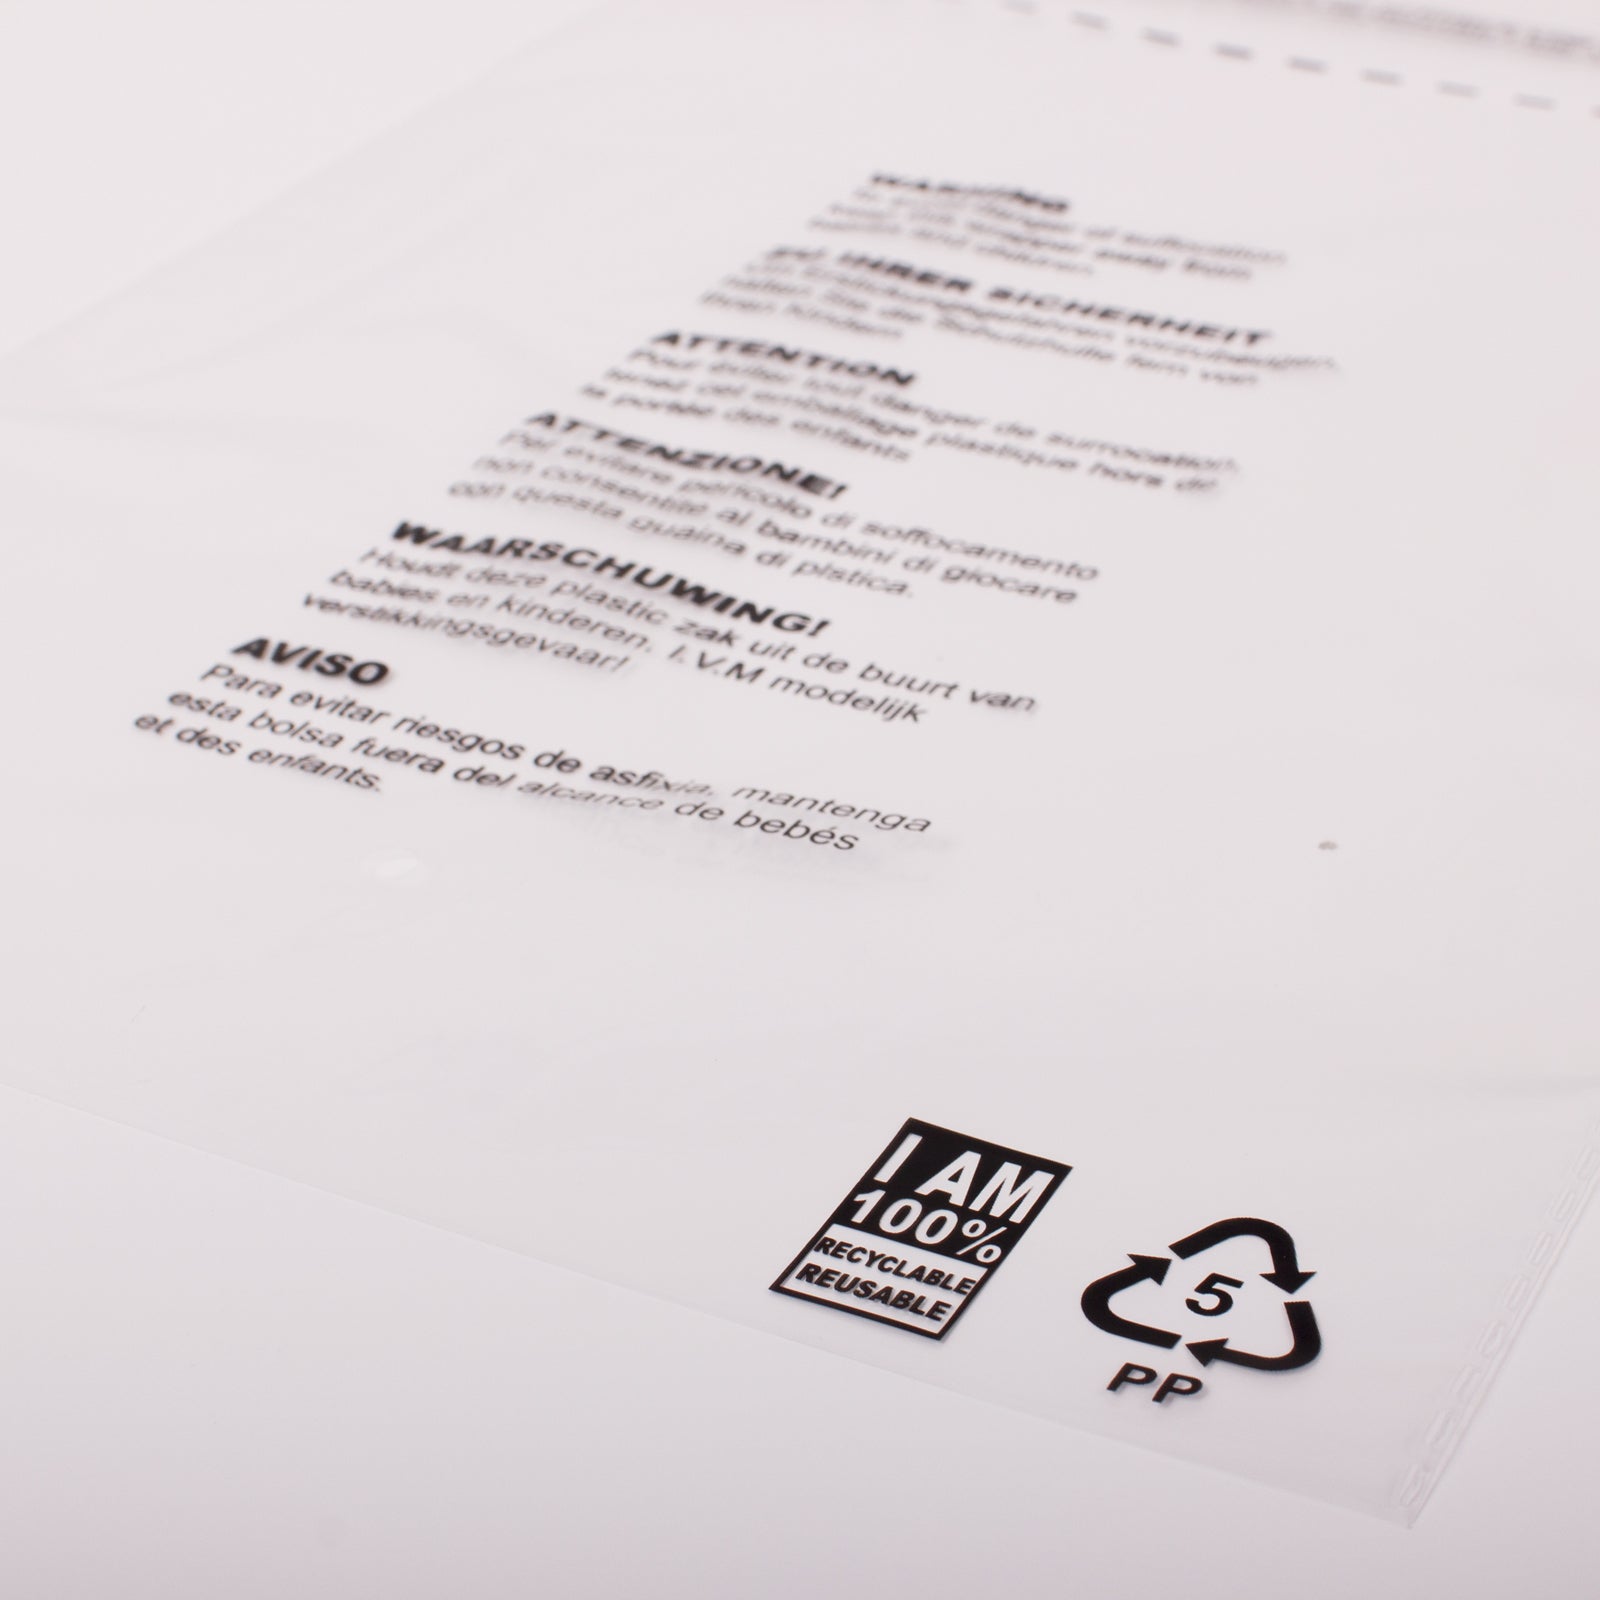 18 x 22 Clear Mailing Bag with 'I AM 100% RECYCLABLE'